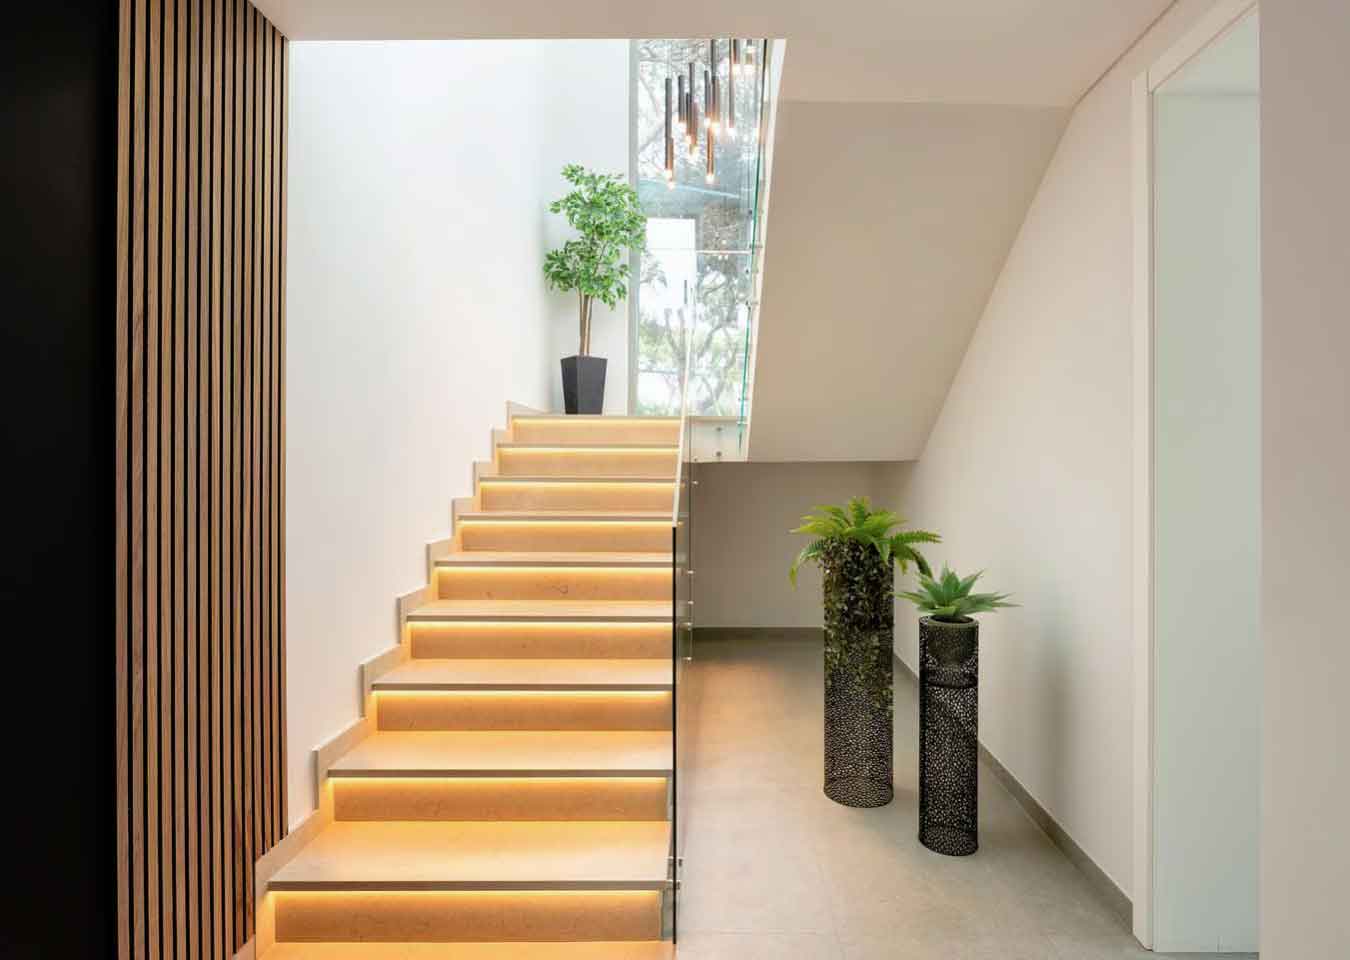 A staircase with walnut wood slat panelling, LED-lit stairs, a glass banister and three green houseplants in tall black vases.